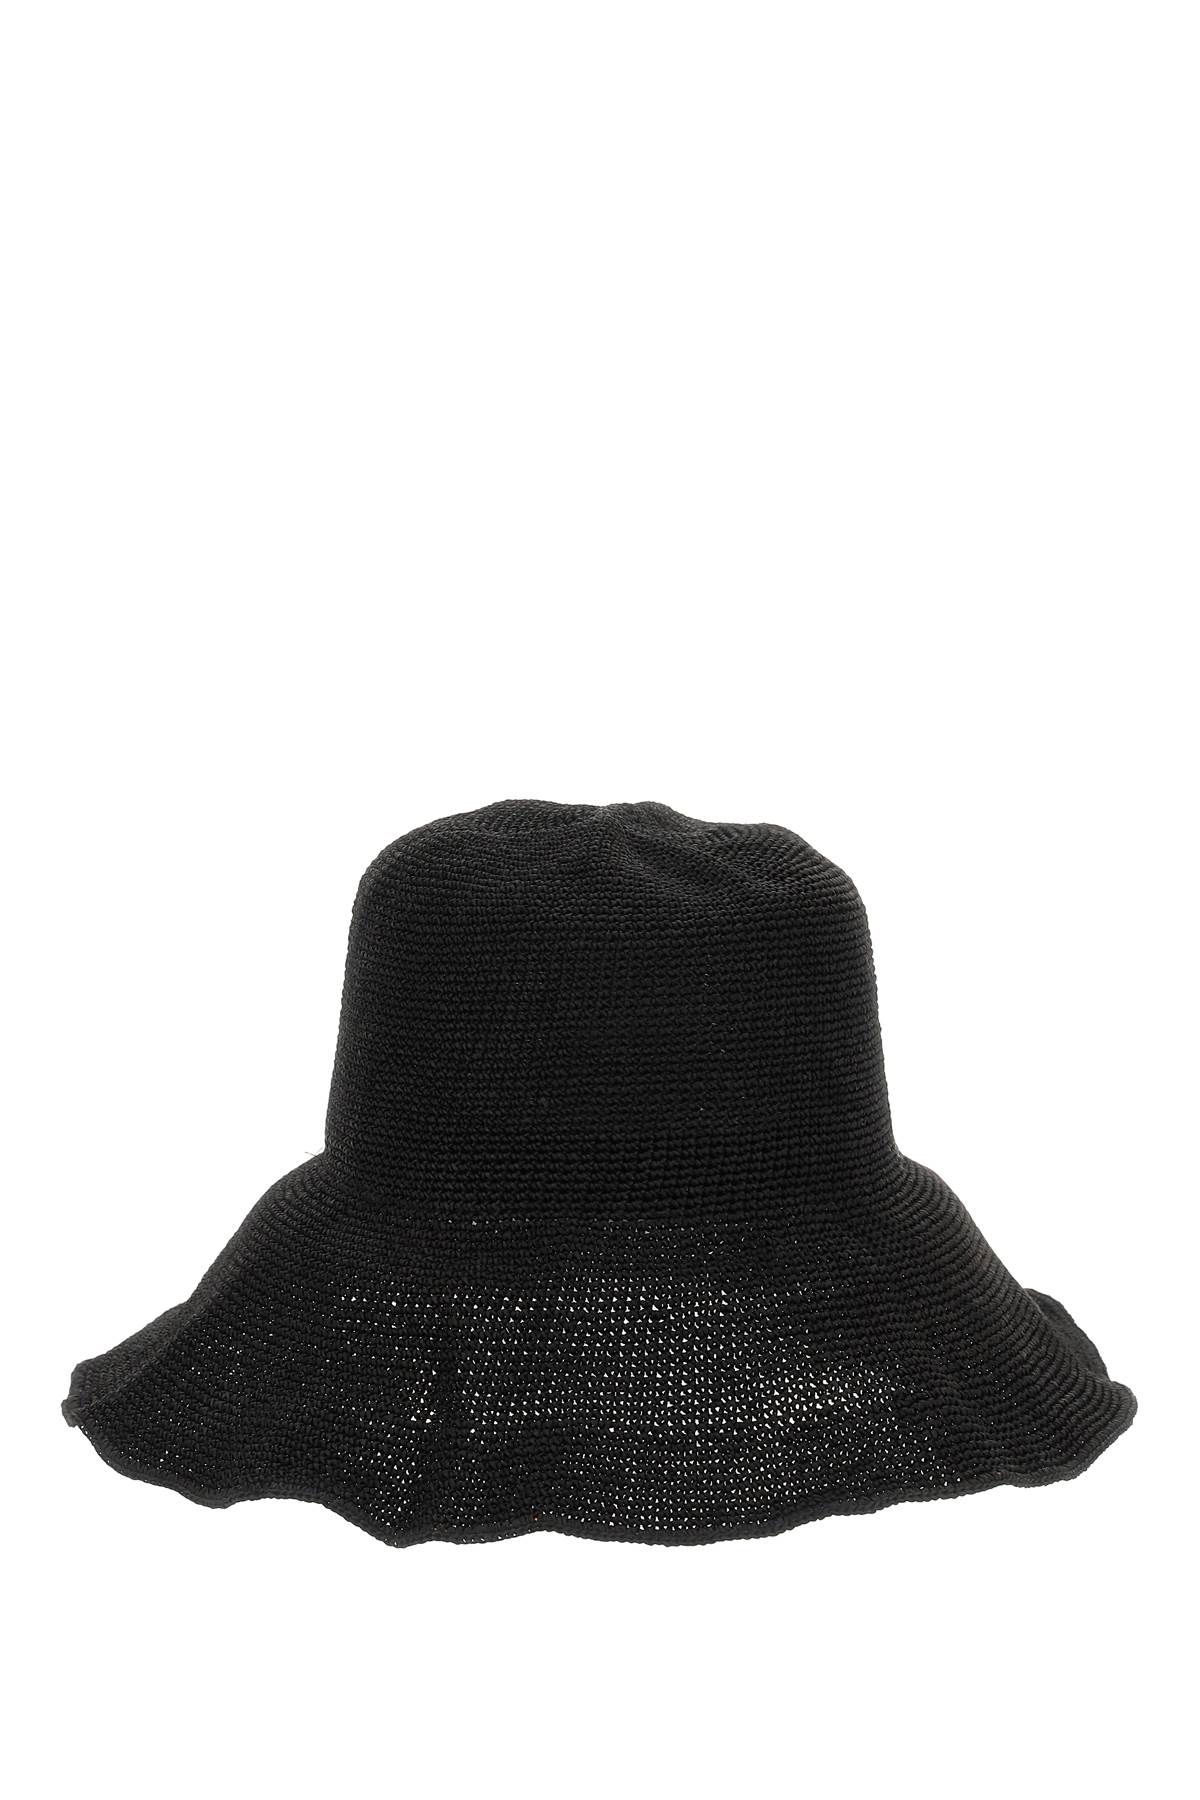 Toteme TOTEME paper straw bucket hat